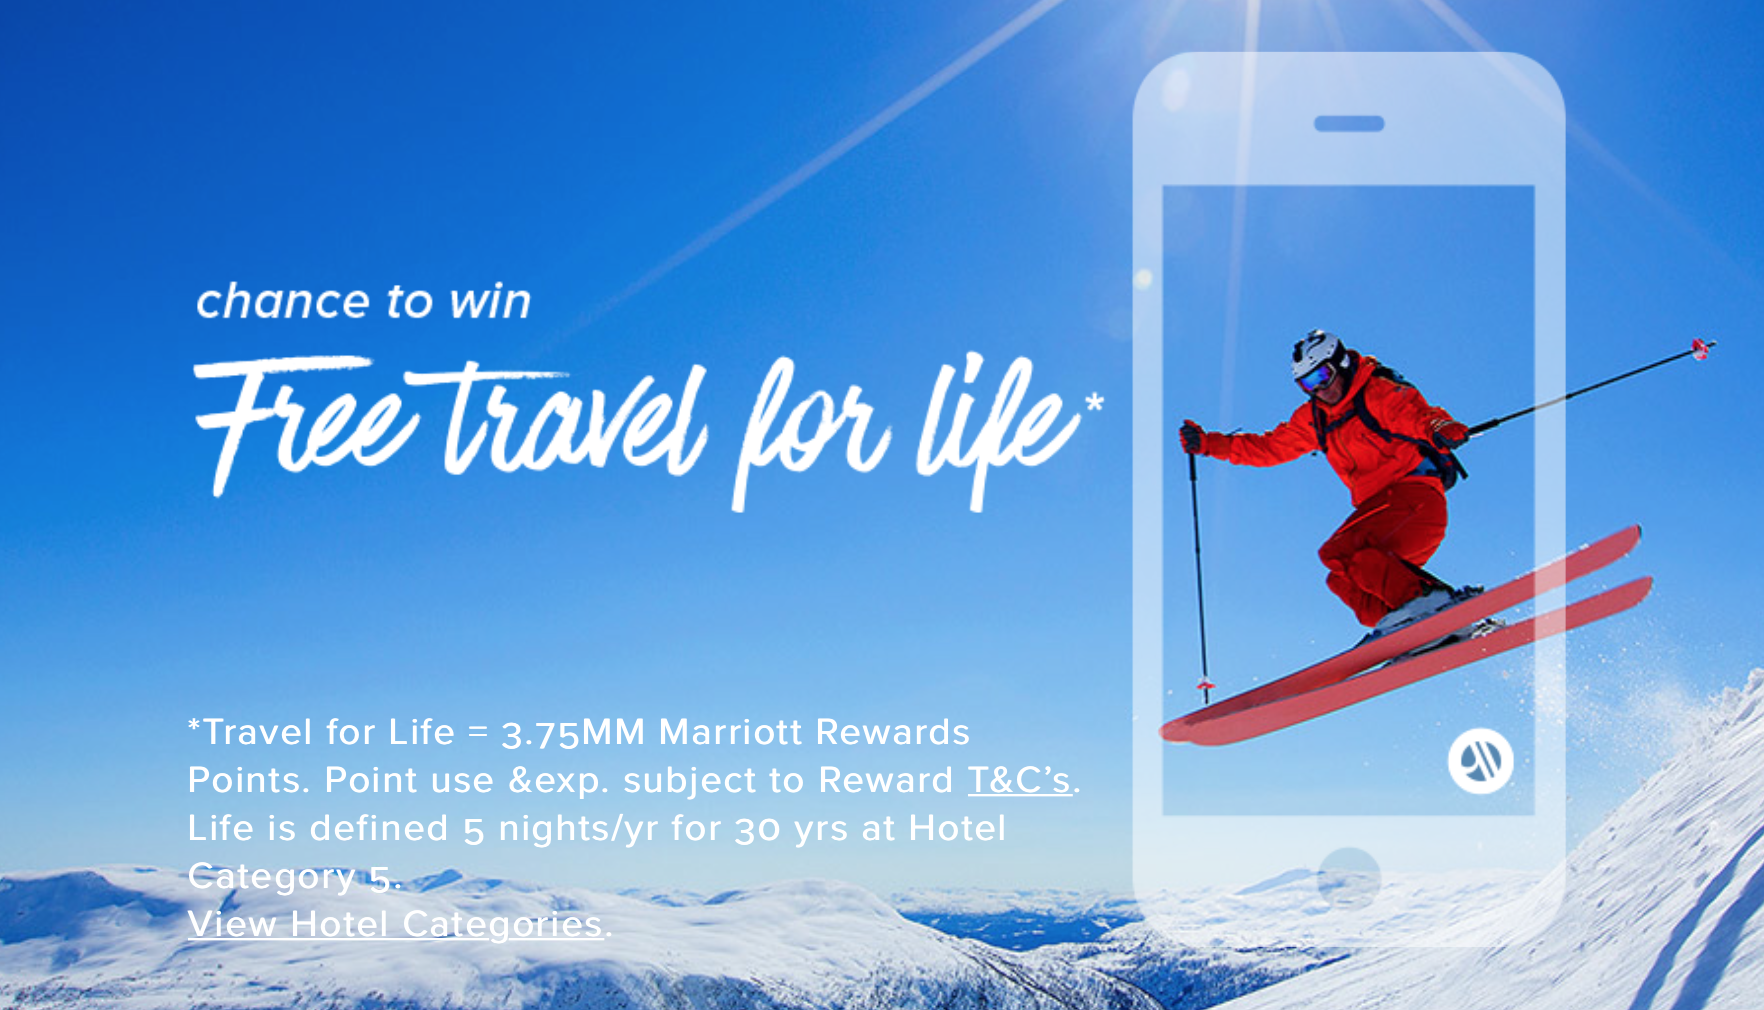 Free travel for life sweepstakes 2017